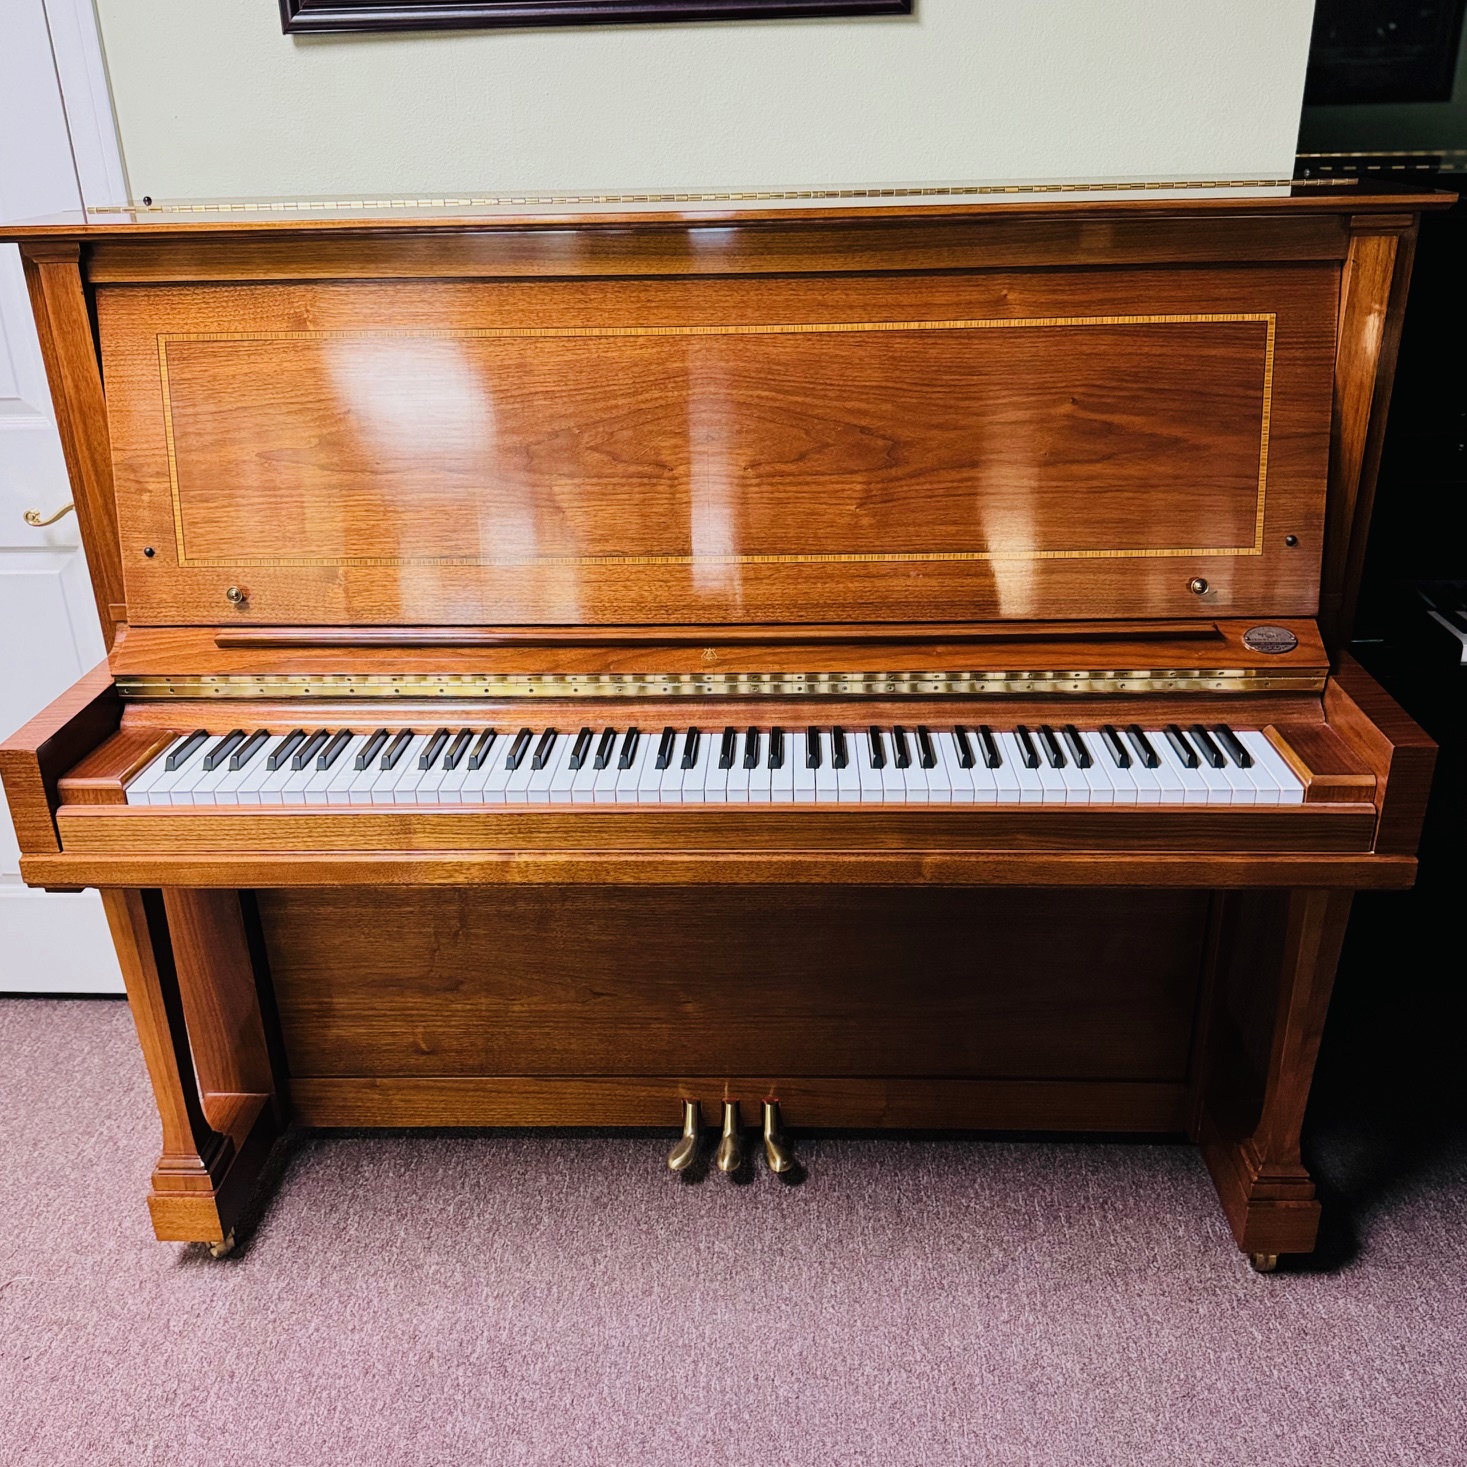 2014 Steinway & Sons K52 Upright Piano Walnut Finish “The Crown Jewel Collection”